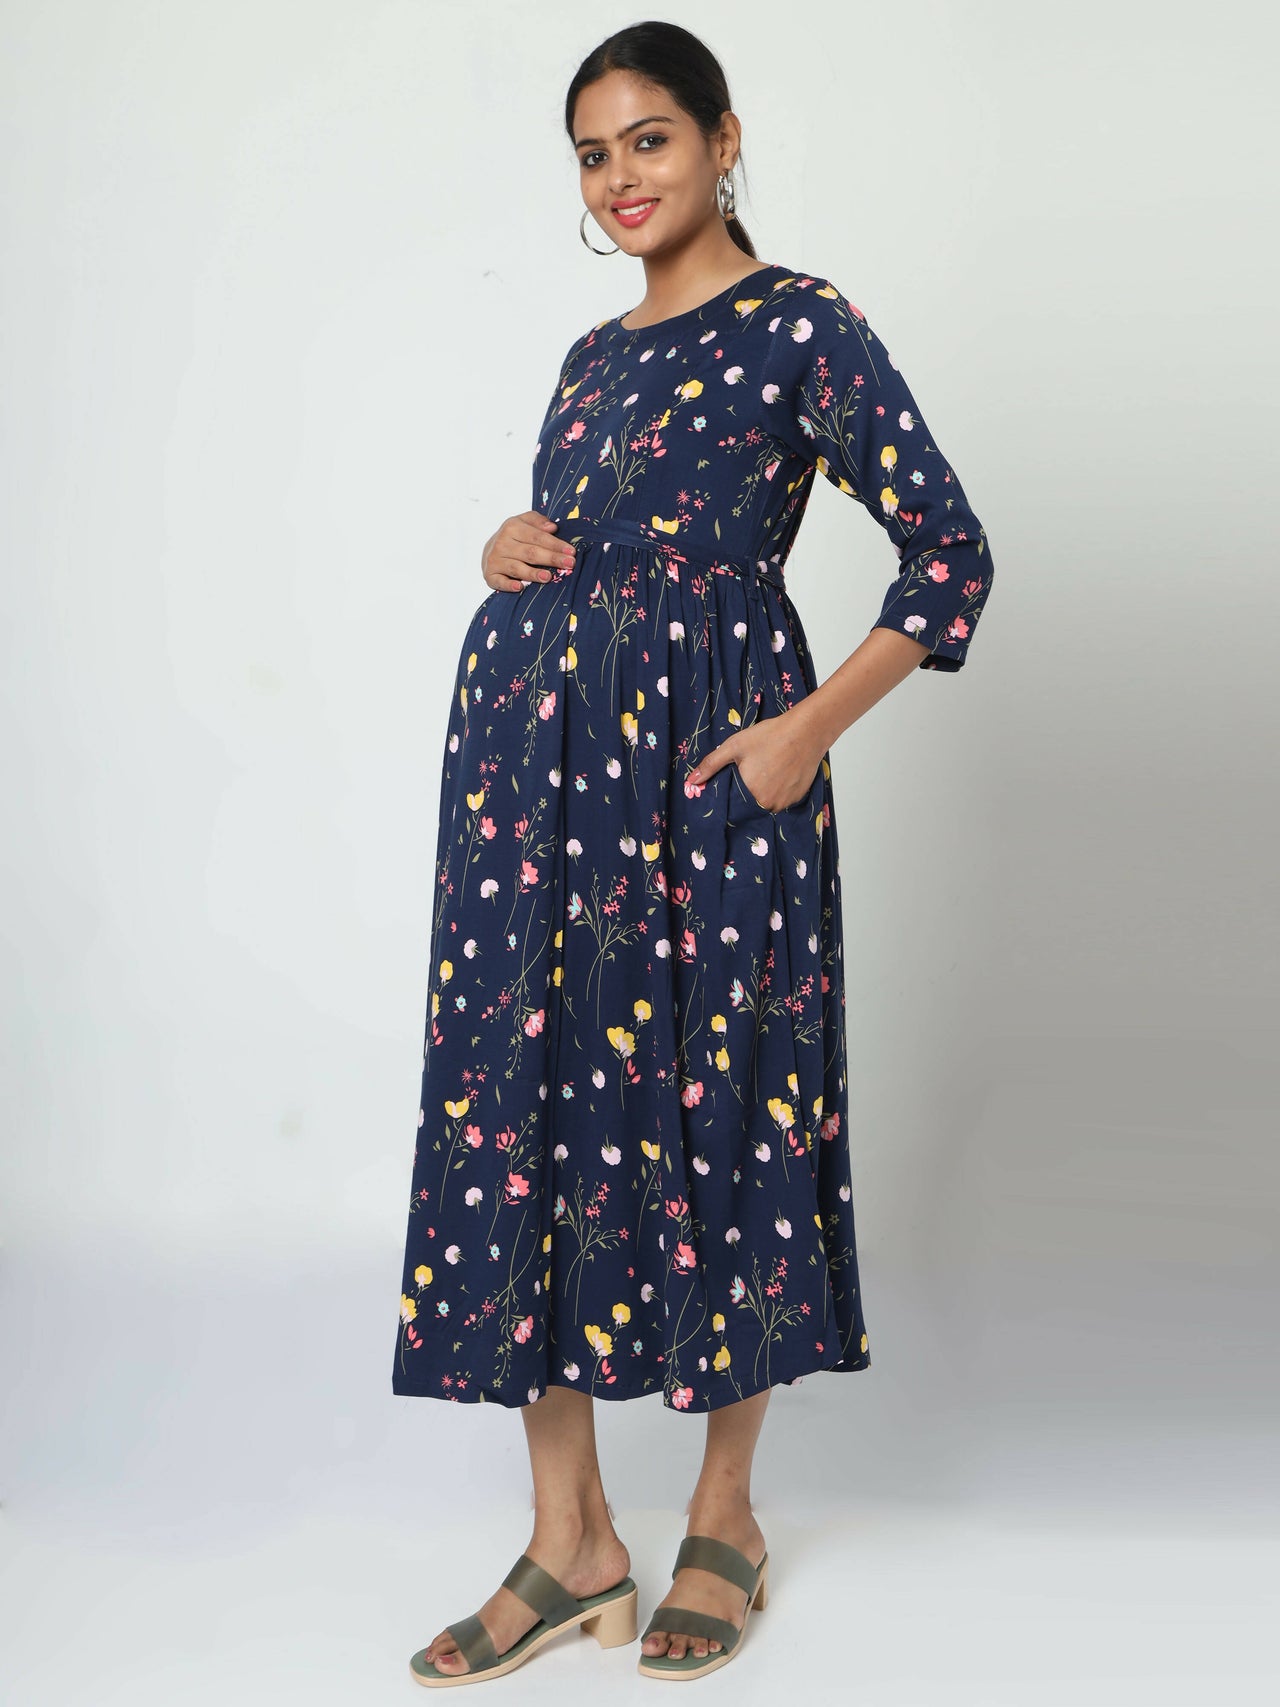 Manet Three Fourth Maternity Dress Floral Print With Concealed Zipper Nursing Access - Navy Blue - Distacart